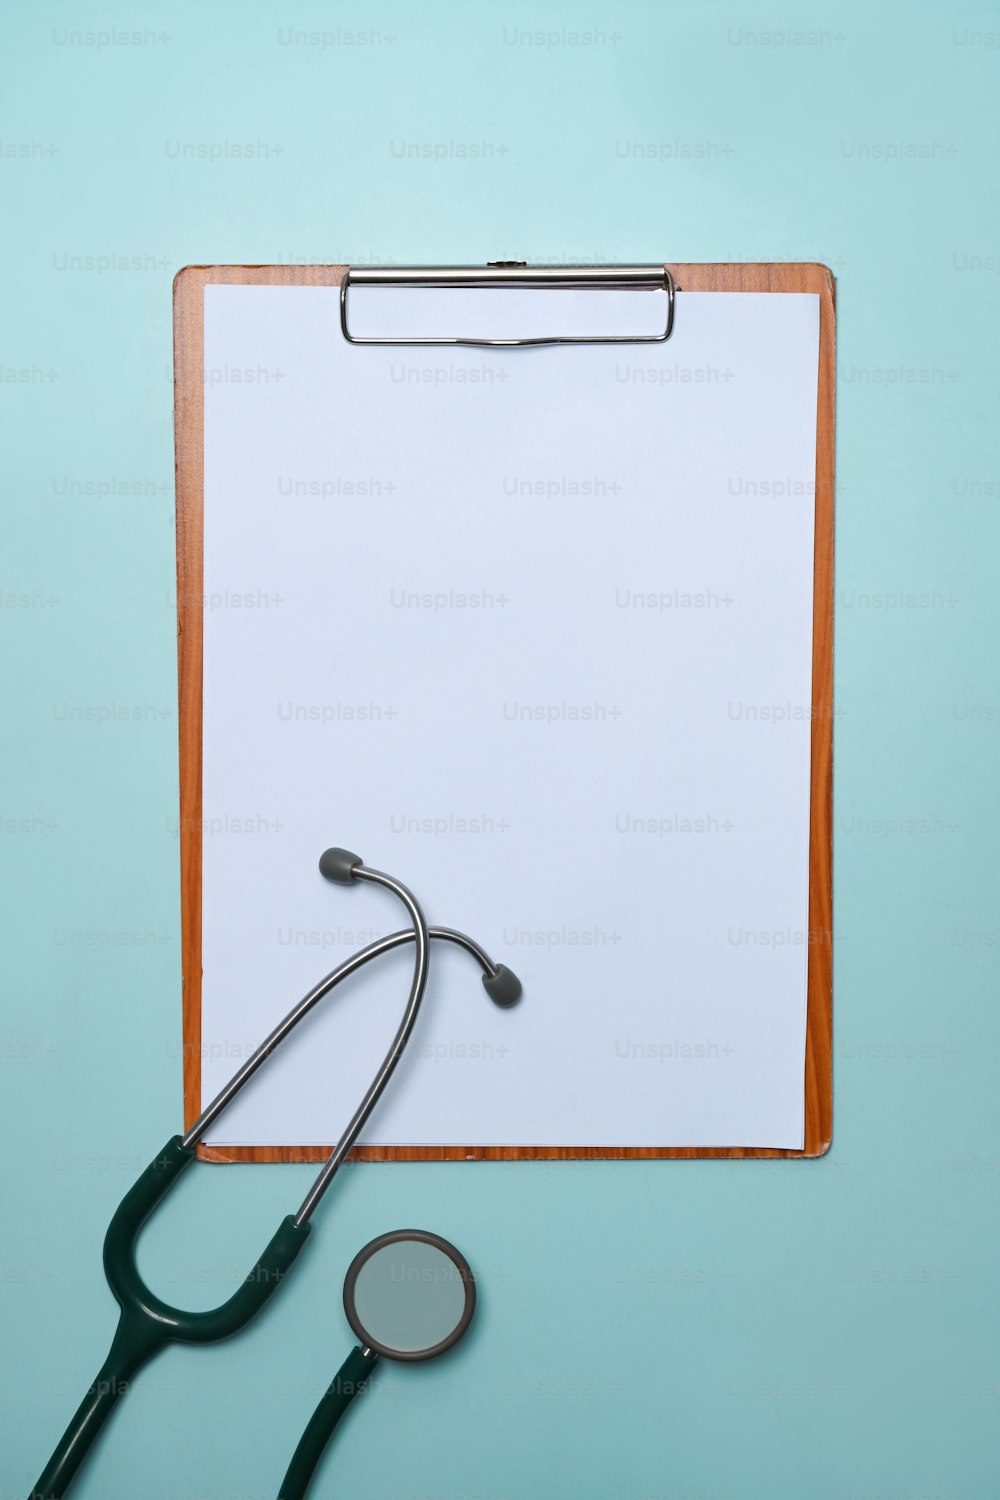 Stethoscope and clipboard on blue background.